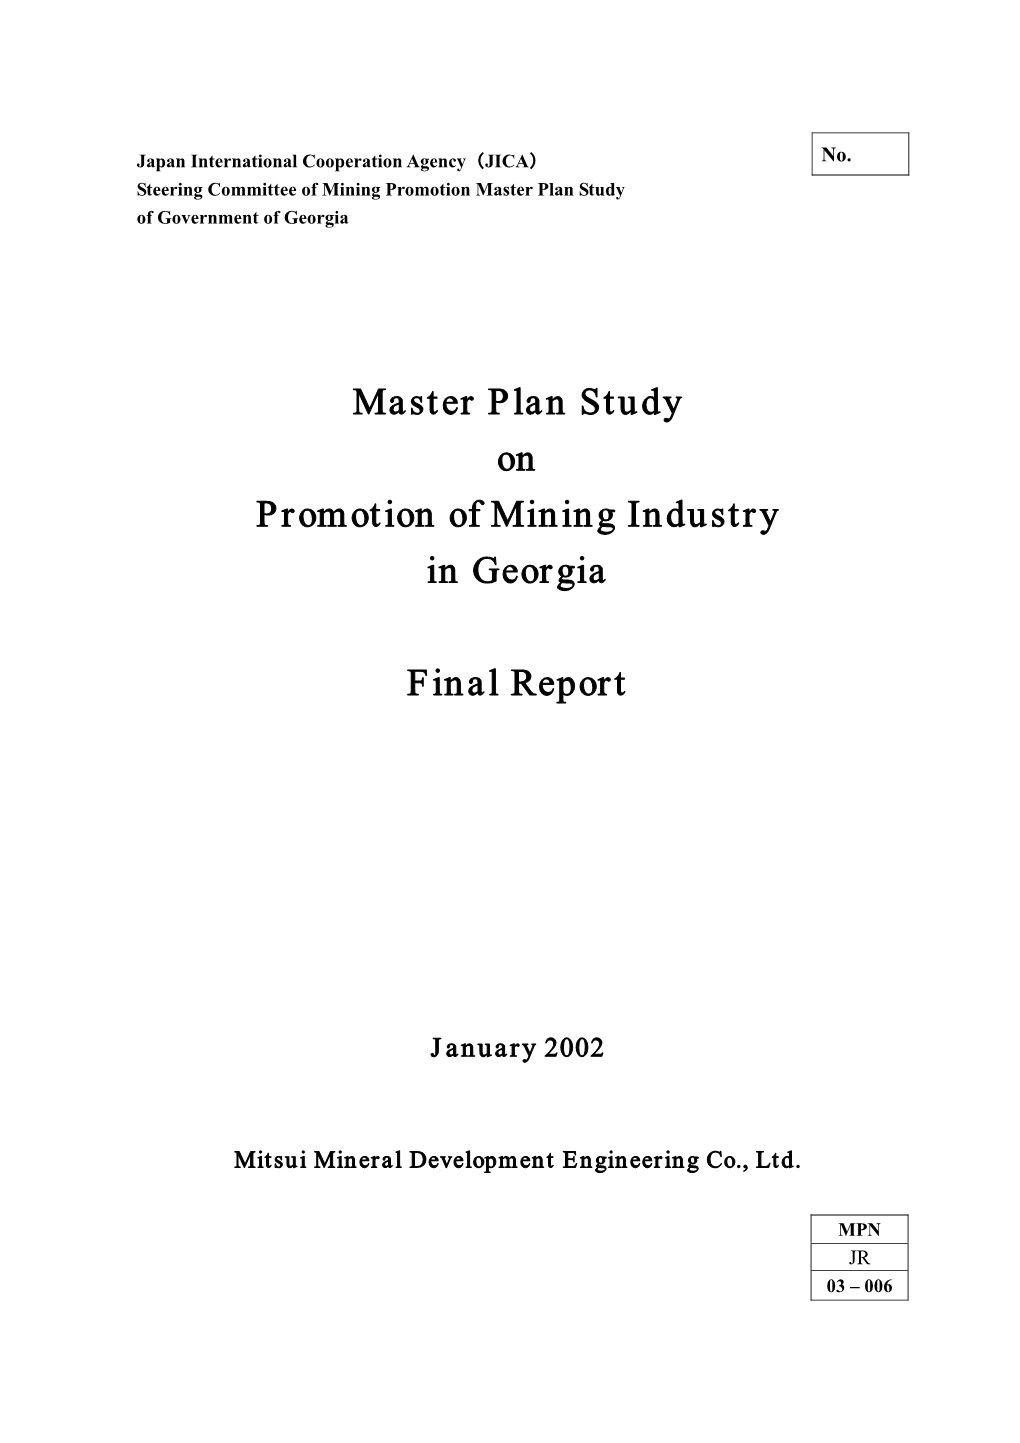 Master Plan Study on Promotion of Mining Industry in Georgia Final Report Contents